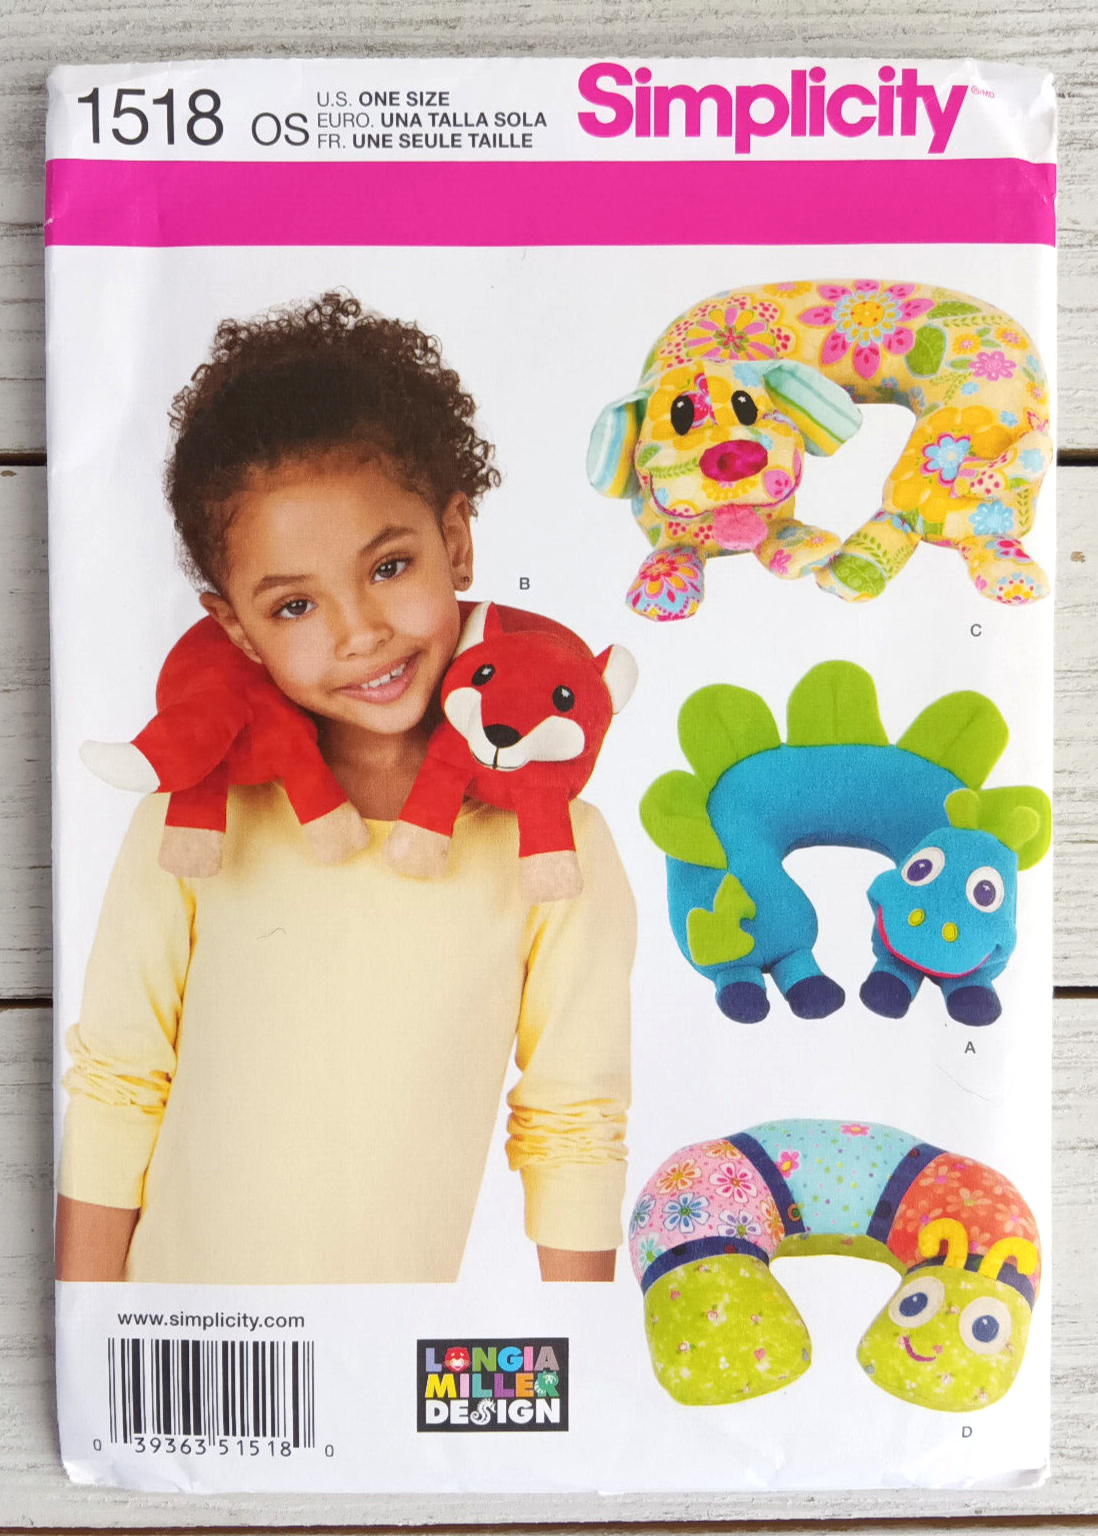 Simplicity 1518 Longia Miller Childs Animal Neck Pillows Sewing Pattern, UNCUT